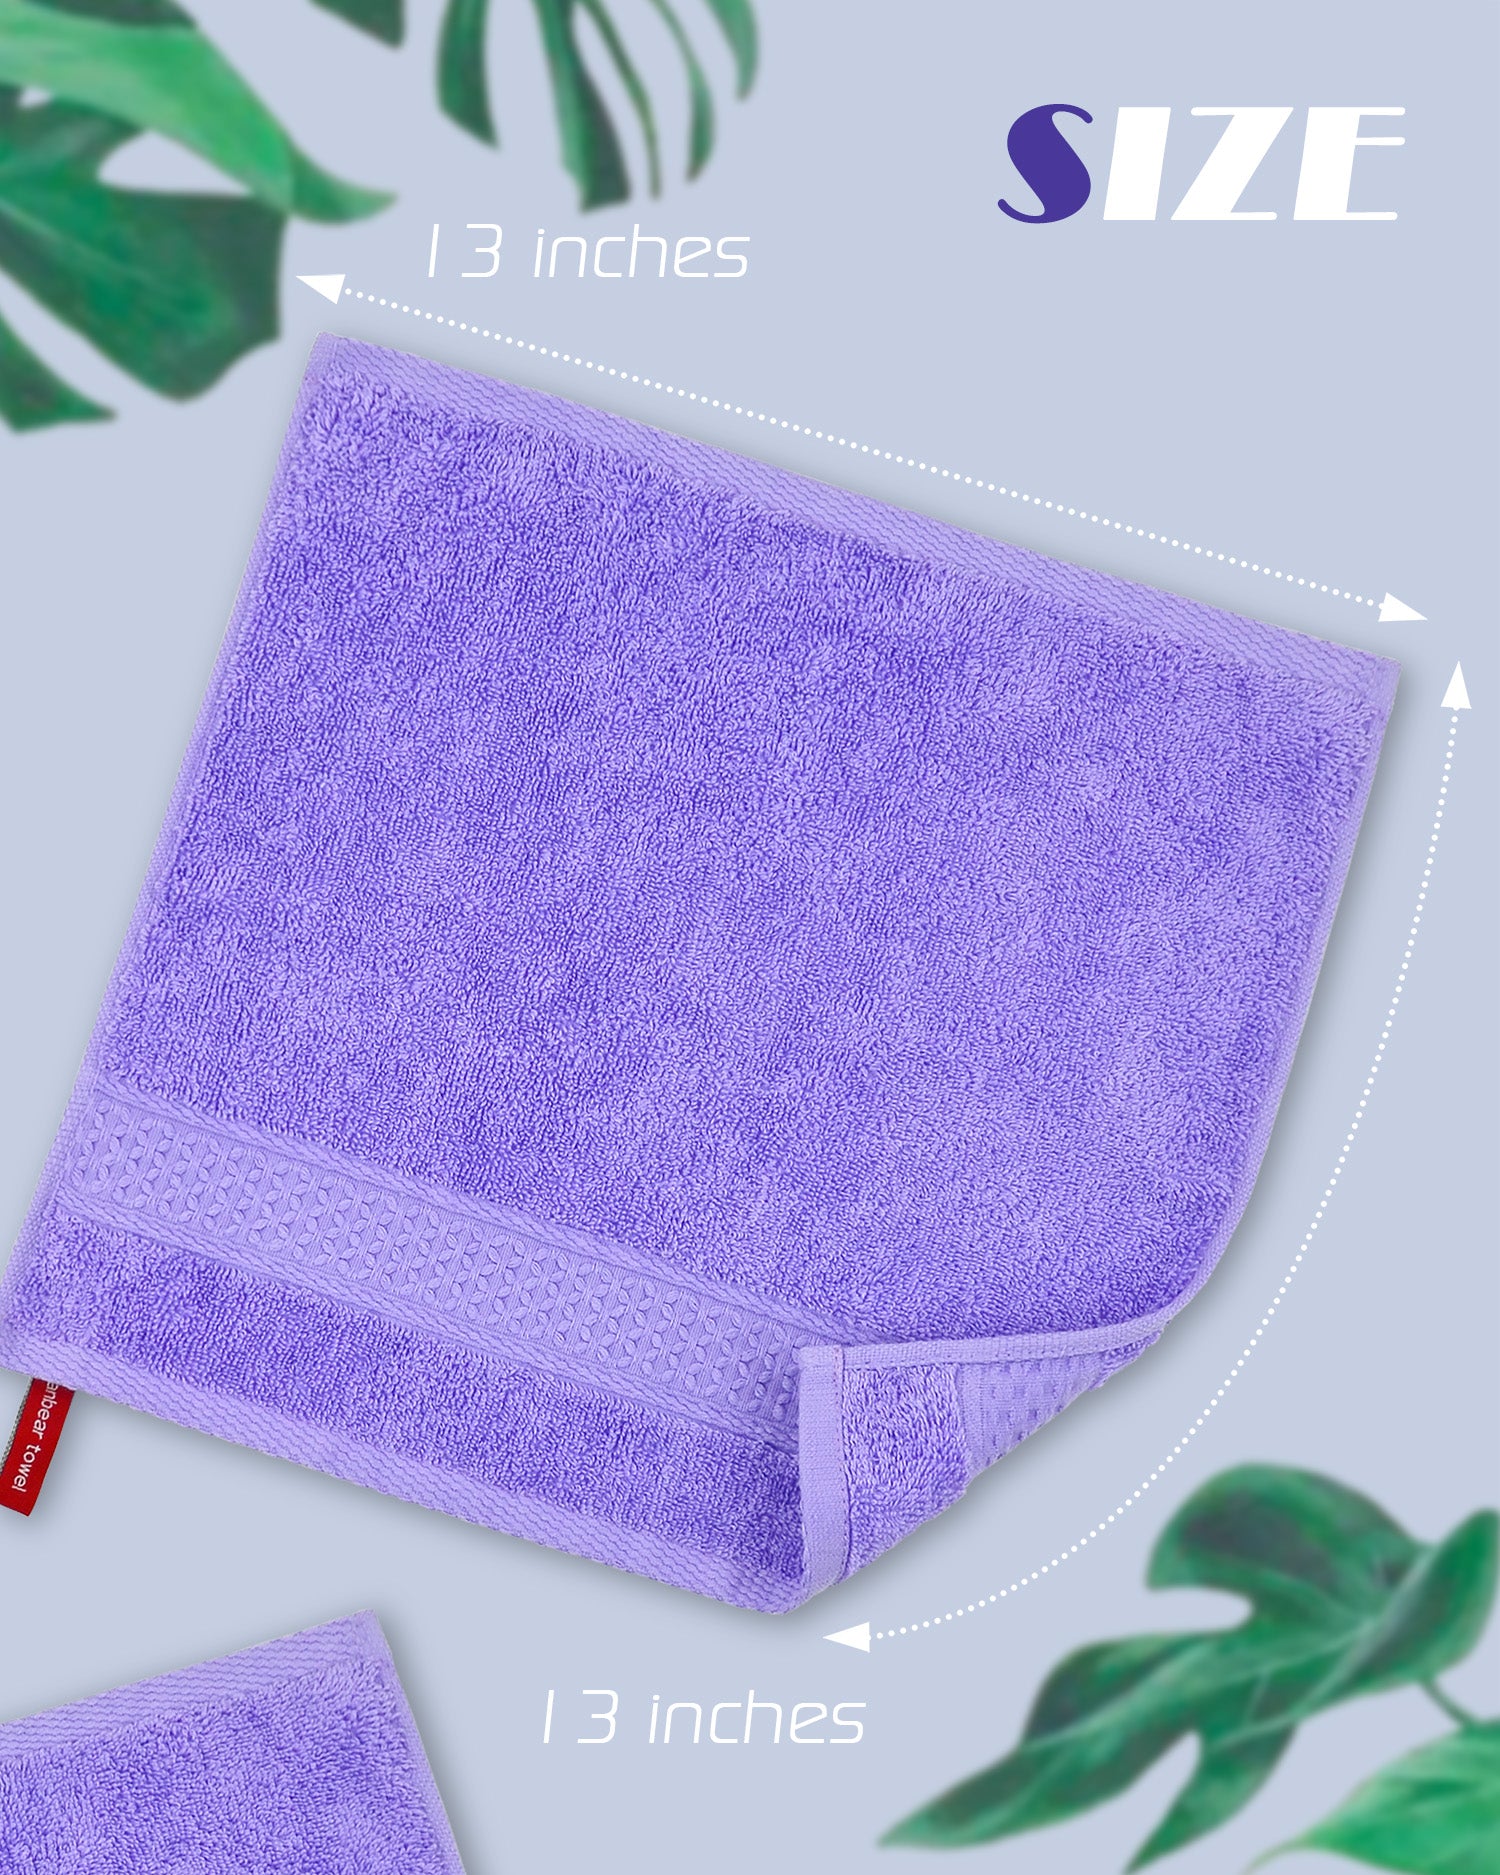 Cleanbear Wash Cloths for Face 100% Cotton Face Towels Ultra Soft 6-Pack Washcloths with Decorative Band 13 by 13 Inches Large Bath Washcloth (Lavender)